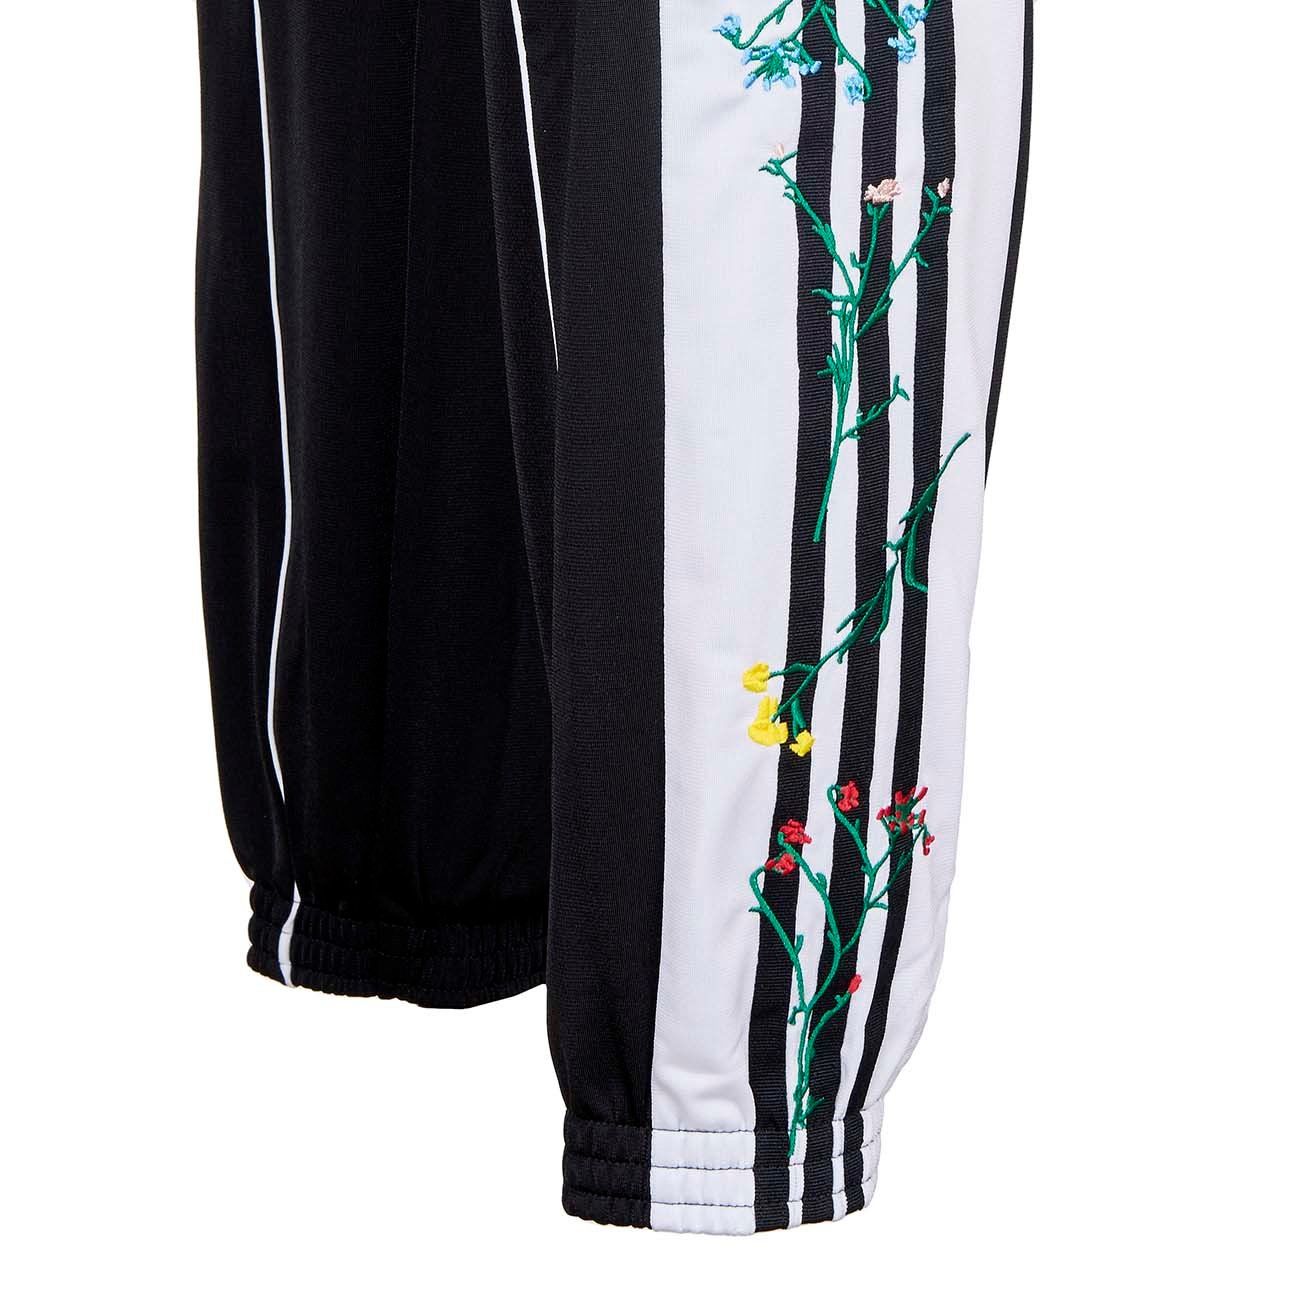 ADIDAS FLORAL TRACK PANTS EMBROIDERED 